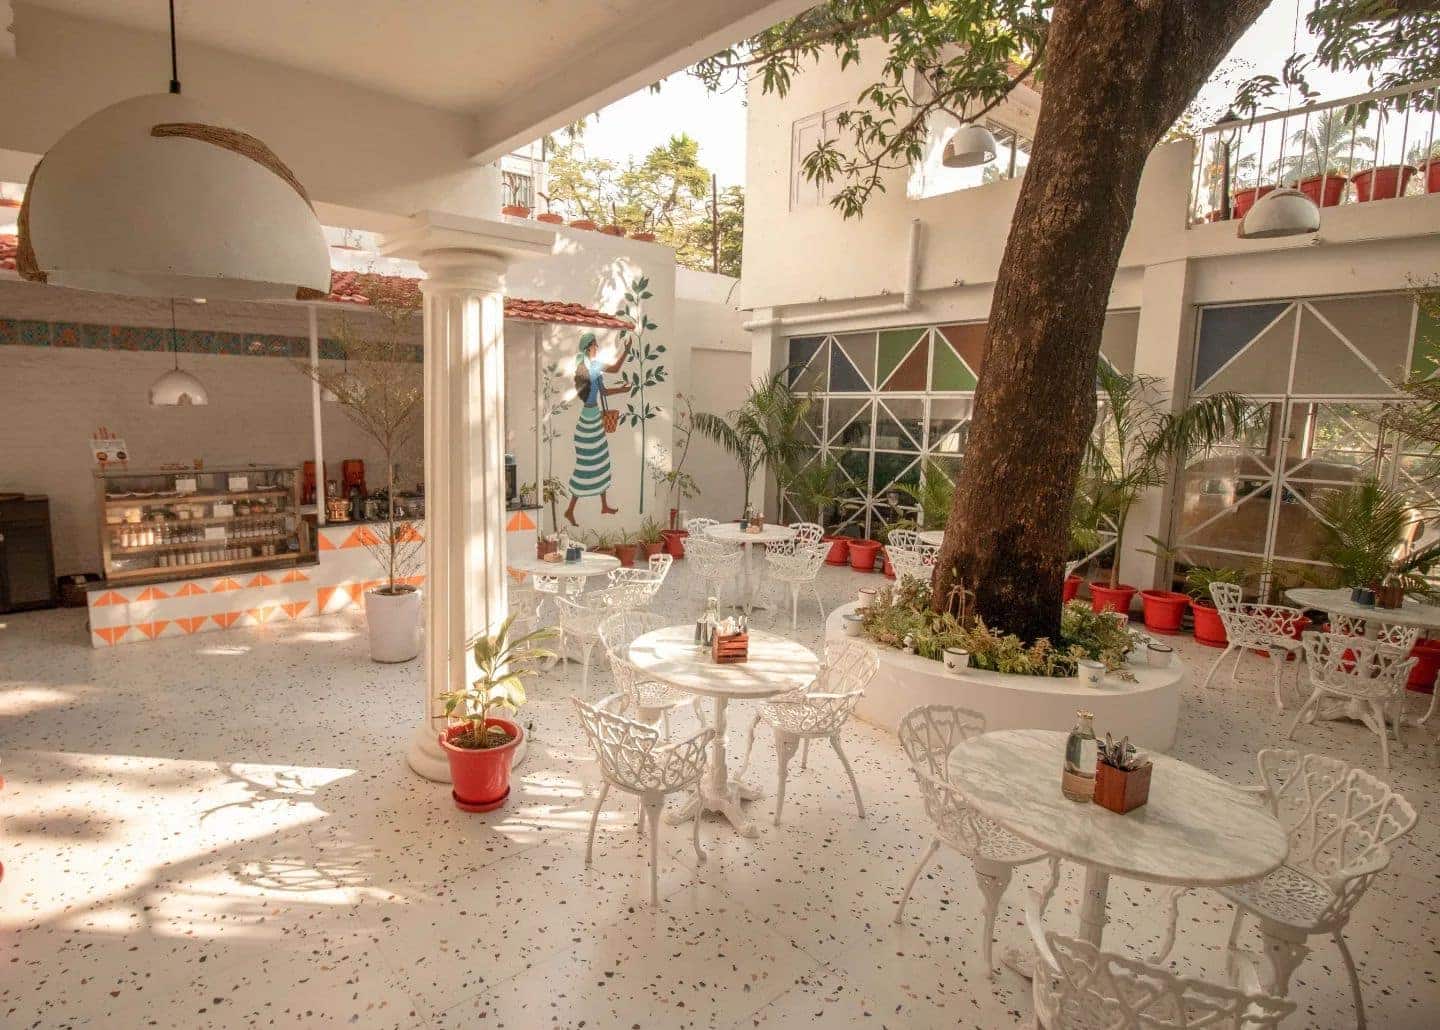 Coffee shop  The Telegraph checks out Craft coffee at Ballygunge -  Telegraph India